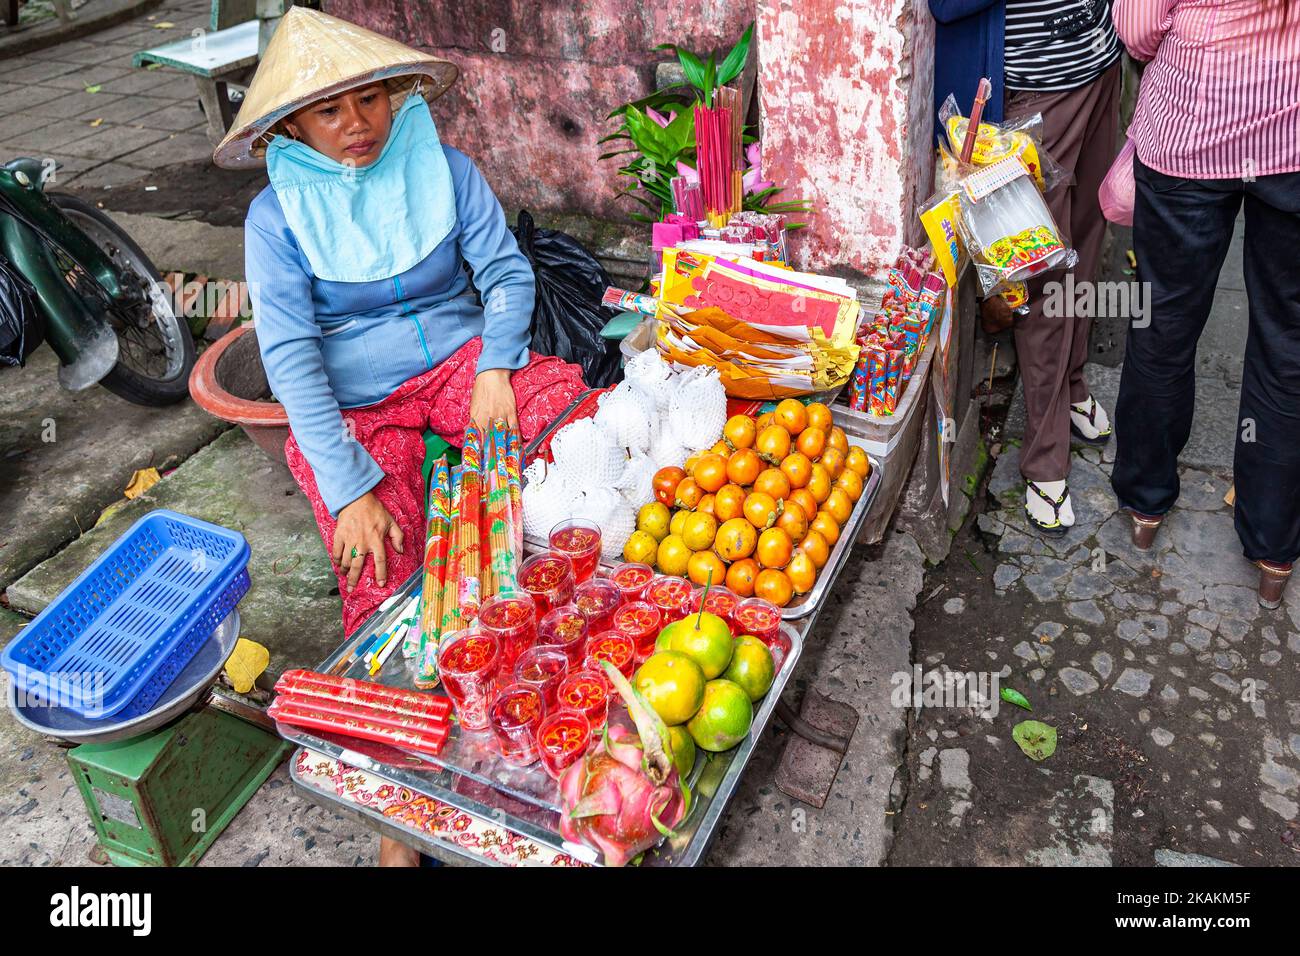 Vietnamese lady wearing bamboo hat selling fruit and vegetables in street market, Ho Chi Minh City, Vietnam Stock Photo